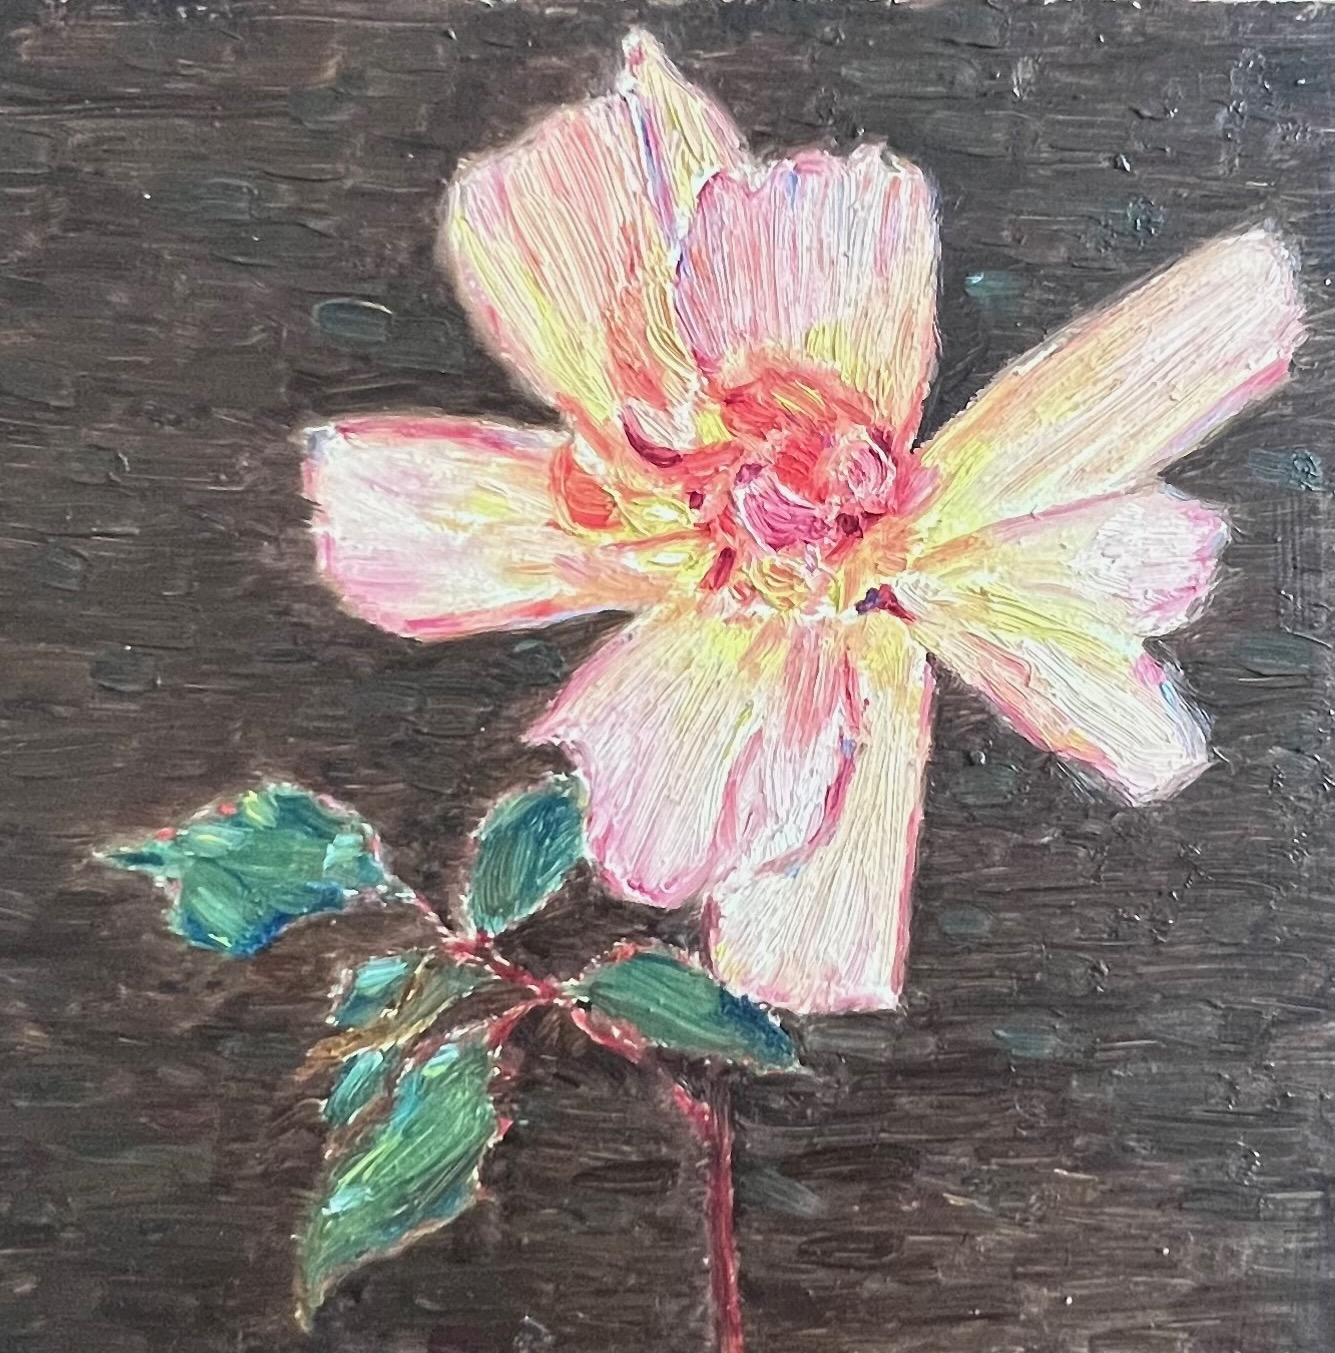 Wild Rose - Pink, Red, Yellow, Green oil ptg Flower from Santa Barbara, CA 0-121 - Painting by Francis Draper Jr.